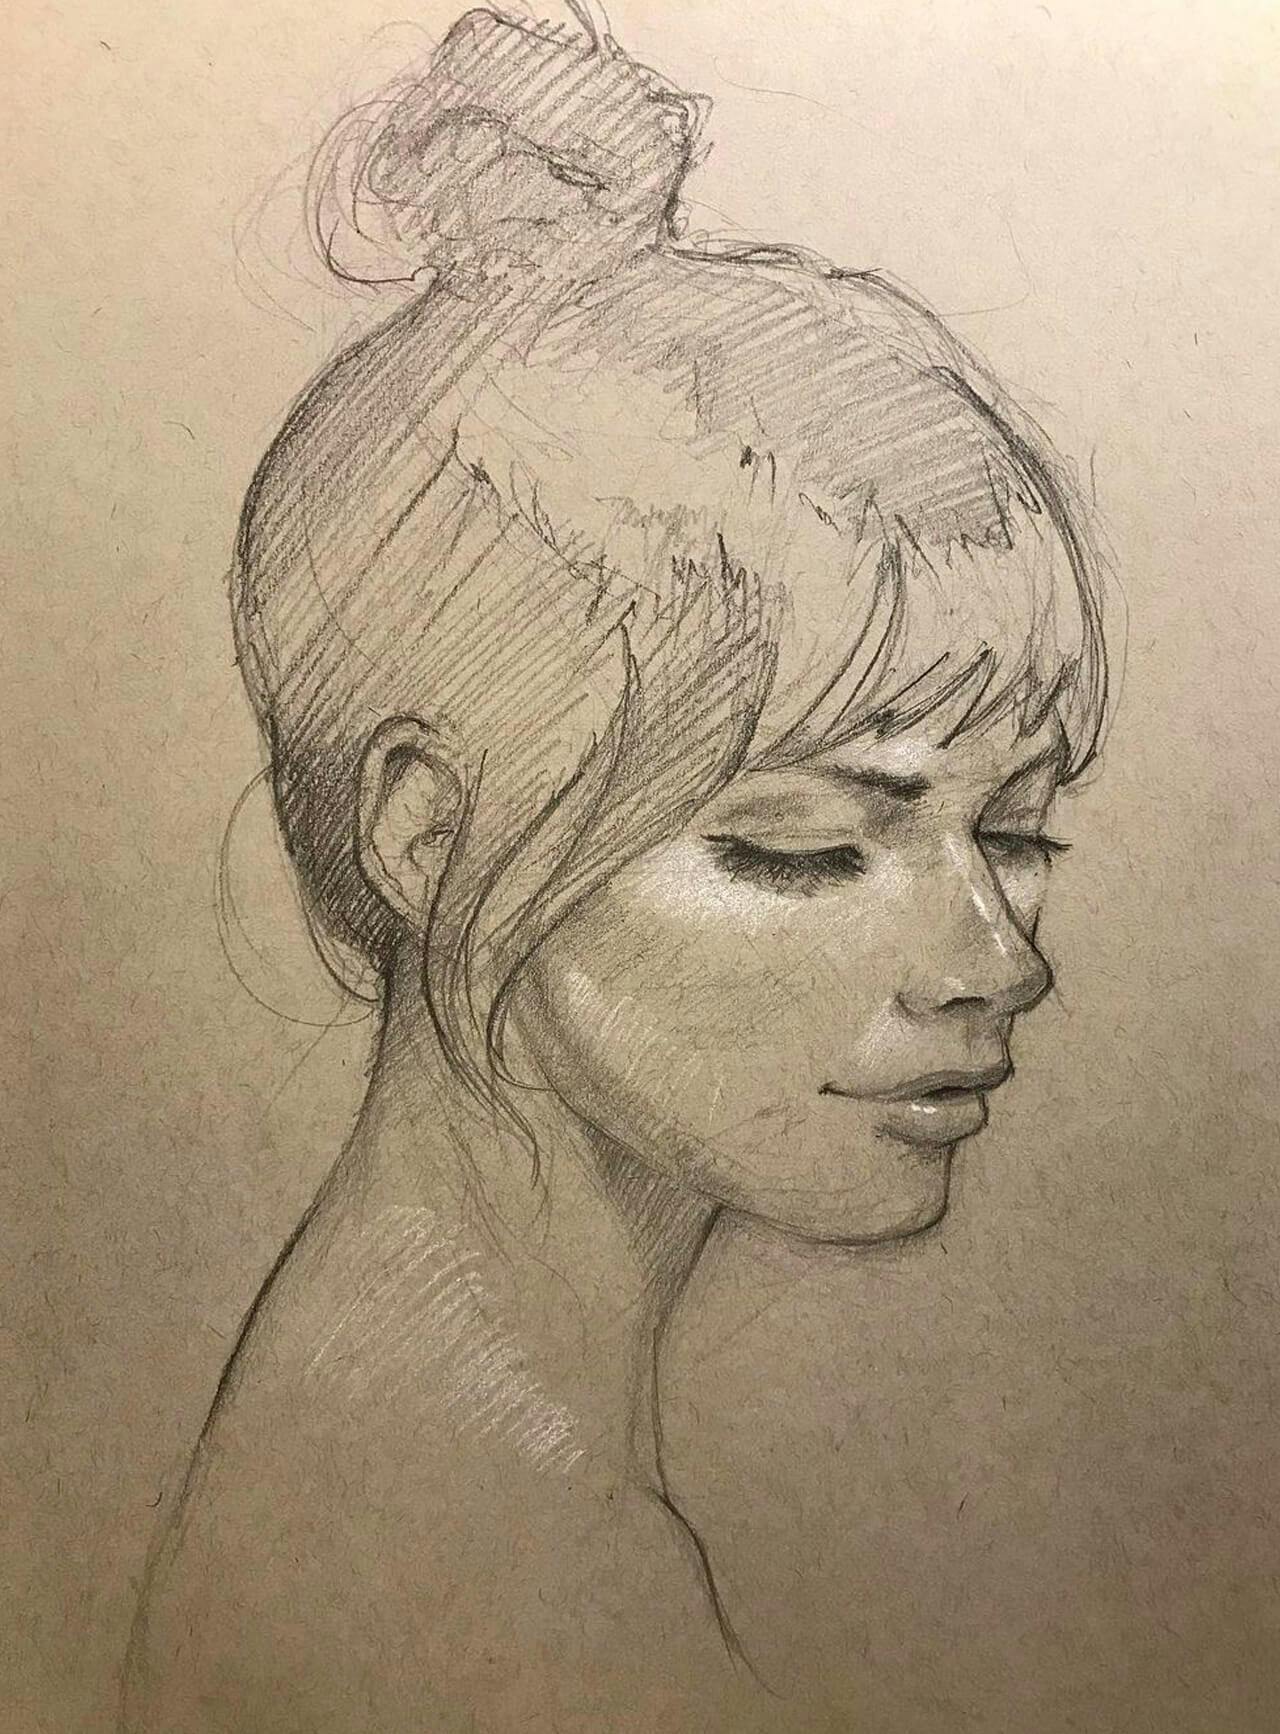 Graphite drawing, woman with hair up, looking down and slightly over her shoulder